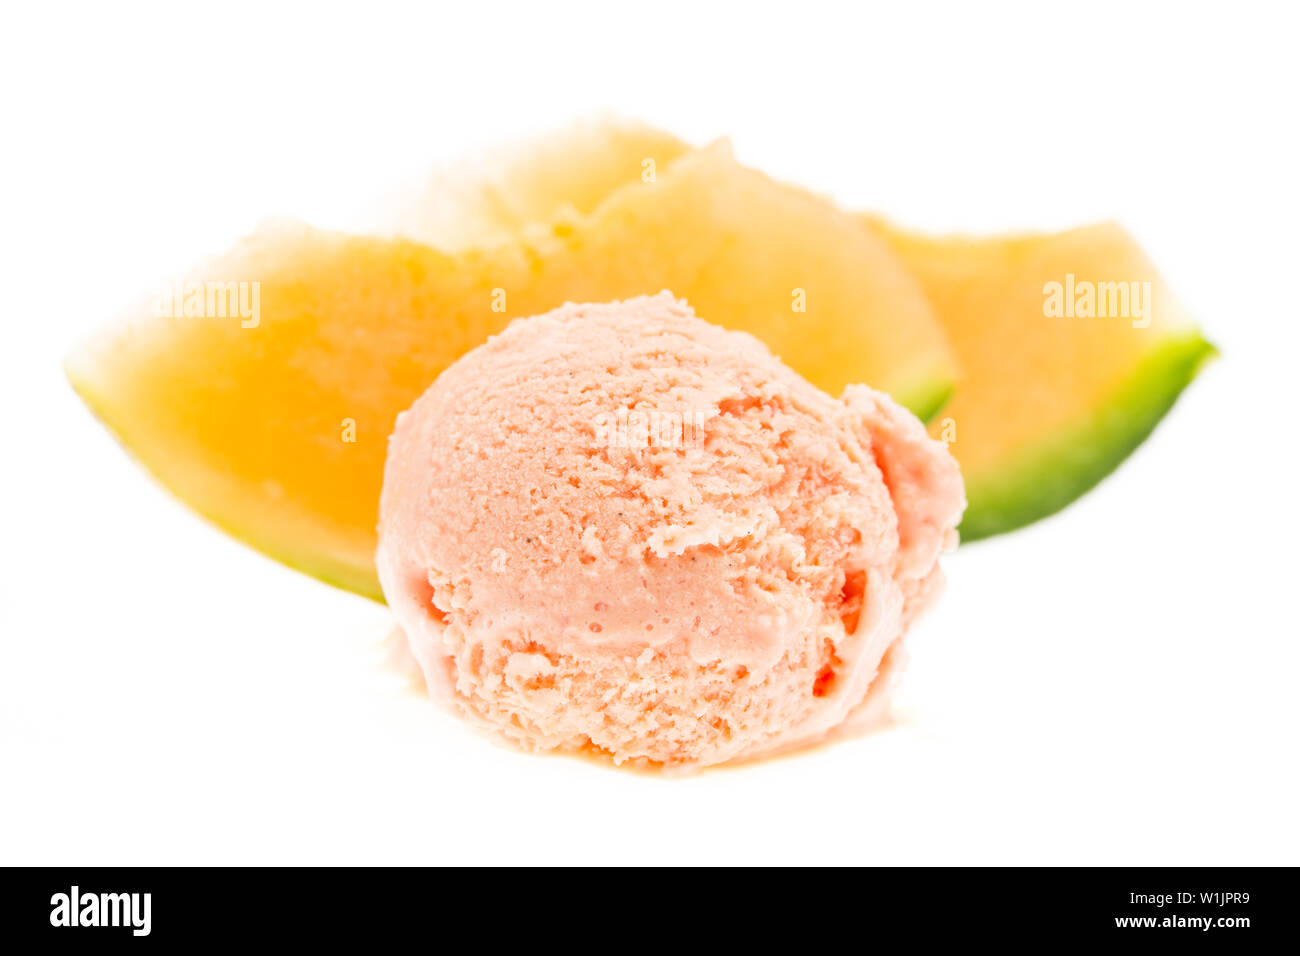 ice cream: melon ice cream ball with melon slices isolated on white background Stock Photo